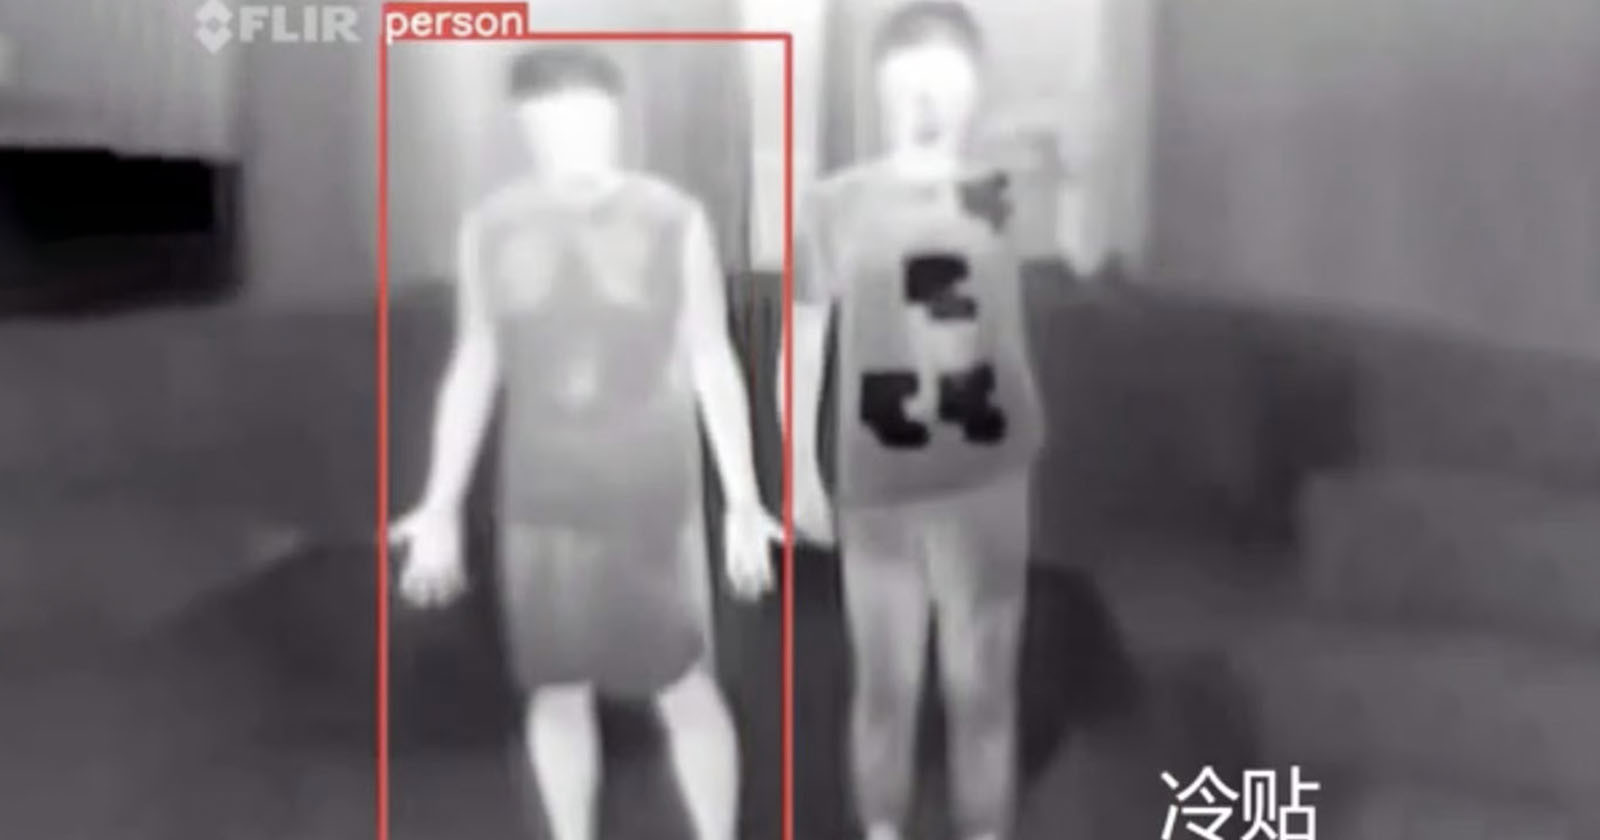  coat makes wearers invisible security cameras 